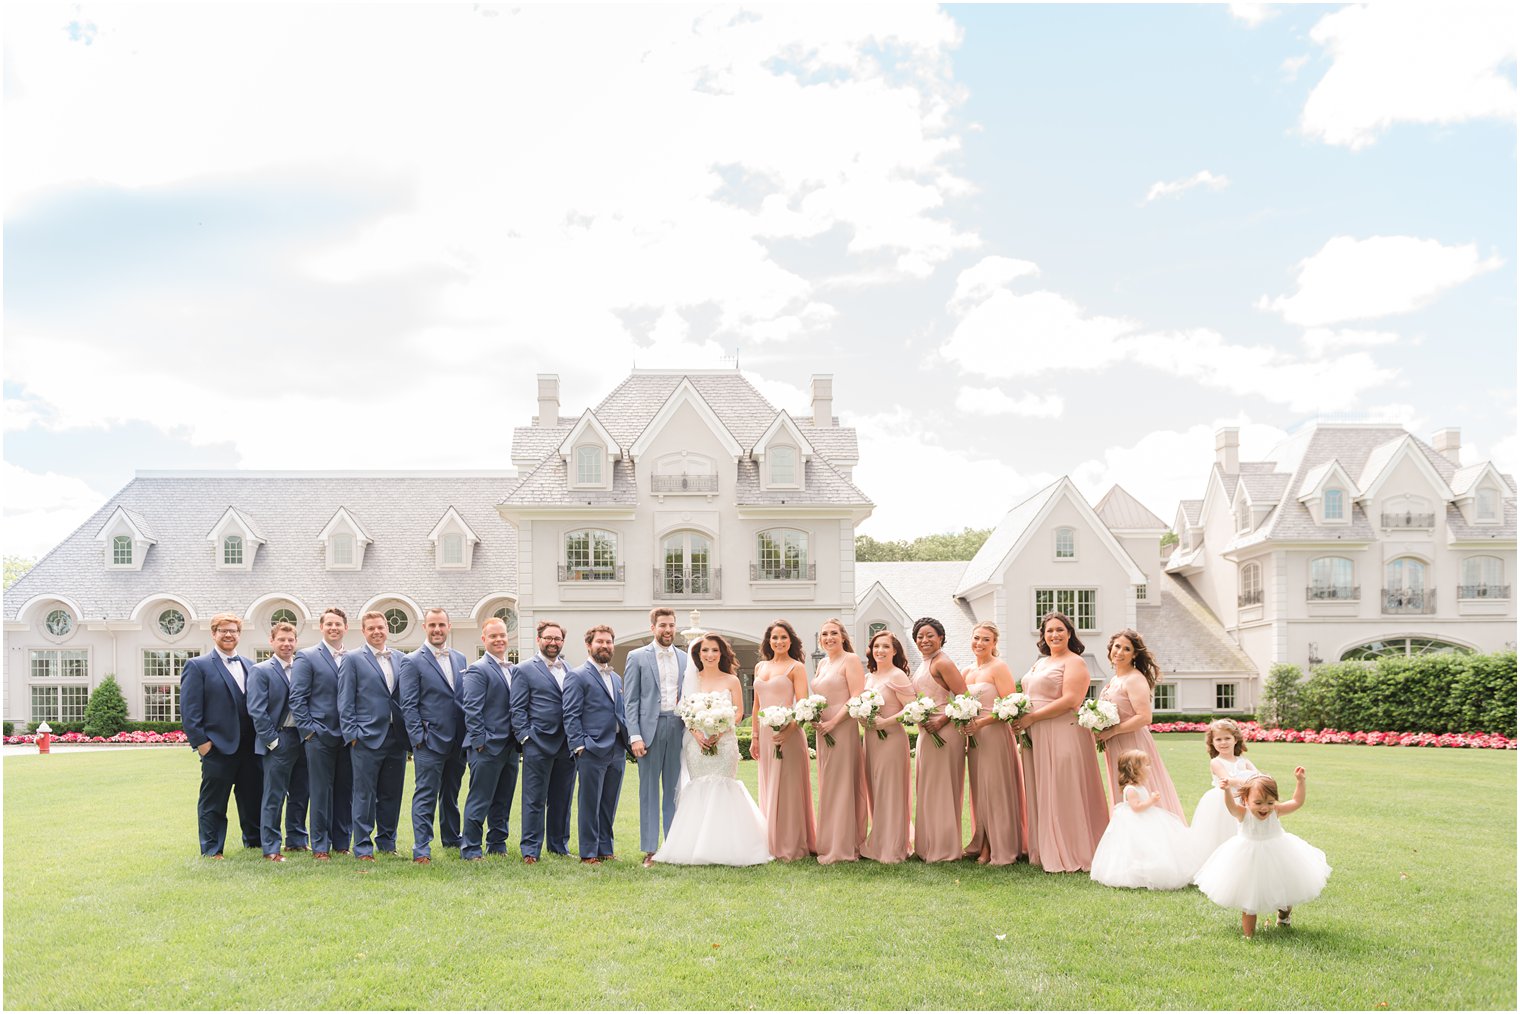 bride and groom stand on lawn with groomsmen in navy suits and bridesmaids in pink gowns on lawn